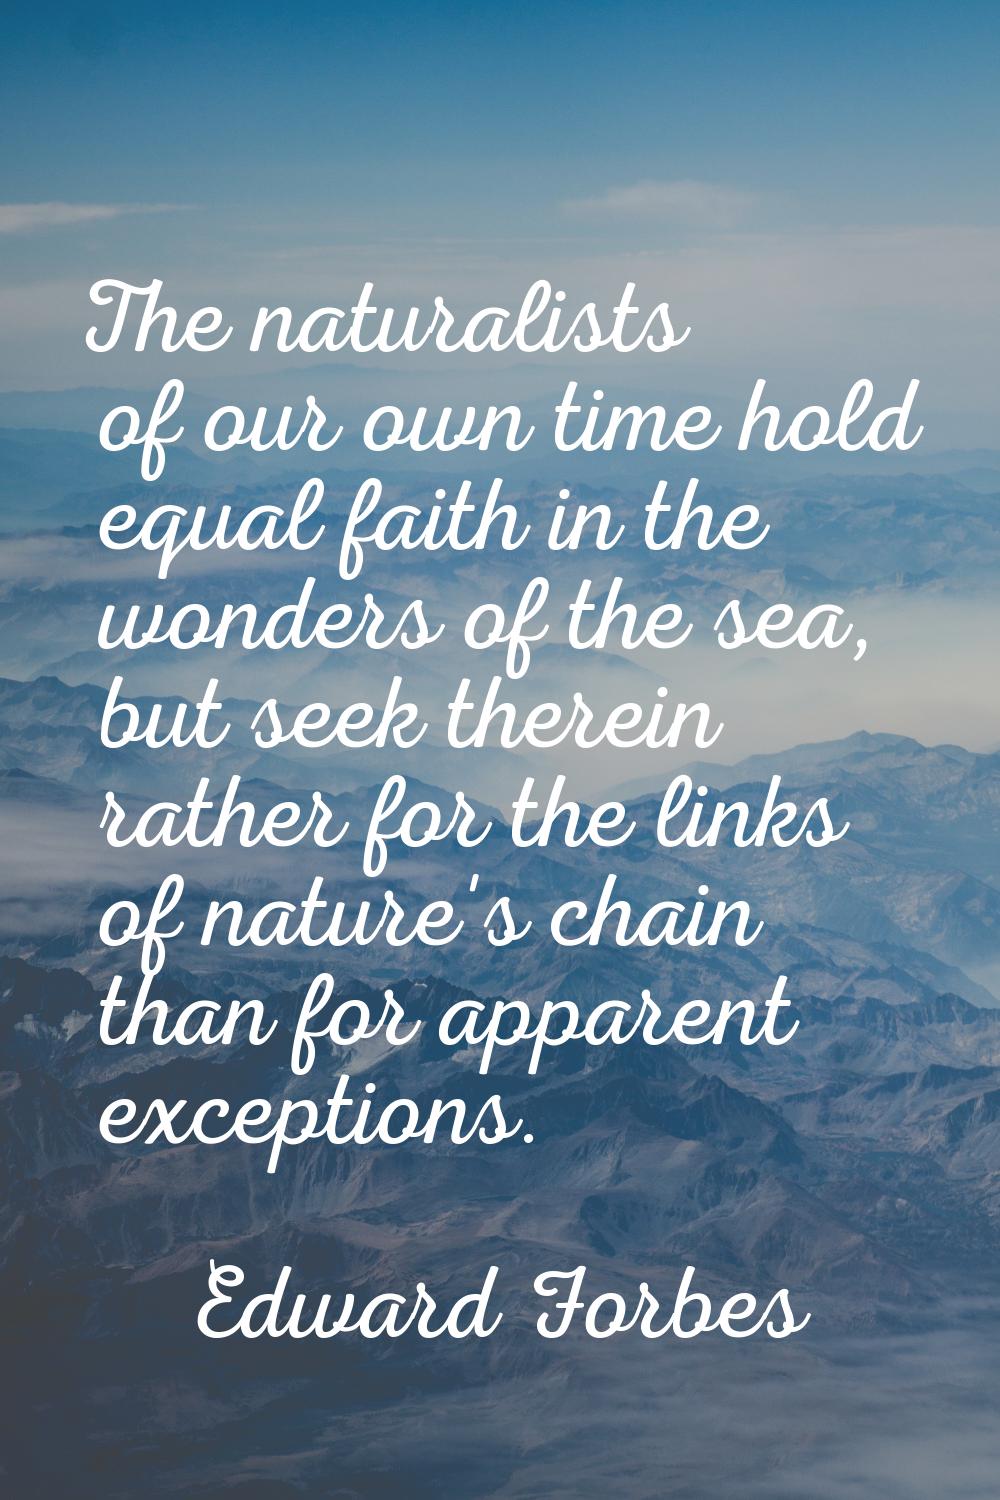 The naturalists of our own time hold equal faith in the wonders of the sea, but seek therein rather